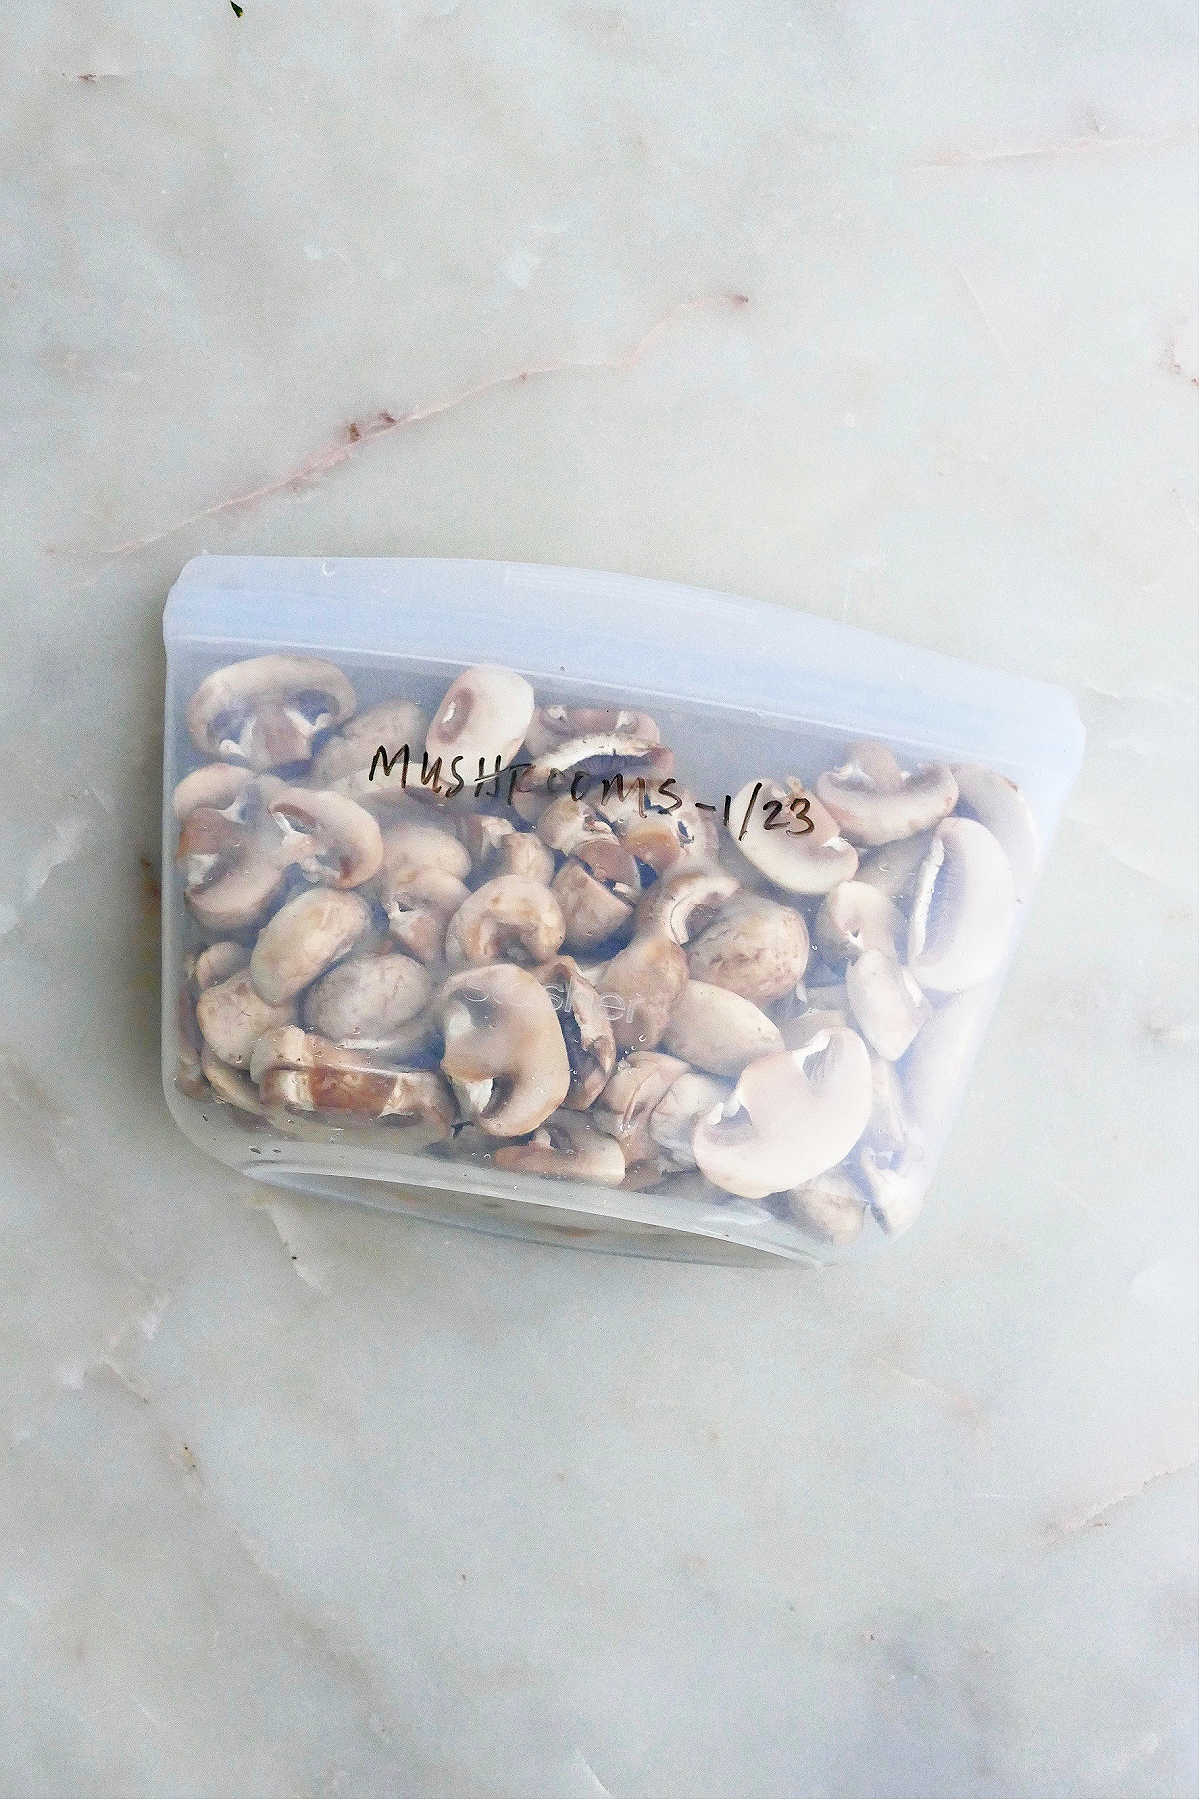 frozen mushrooms in a silicone bag with label on a counter